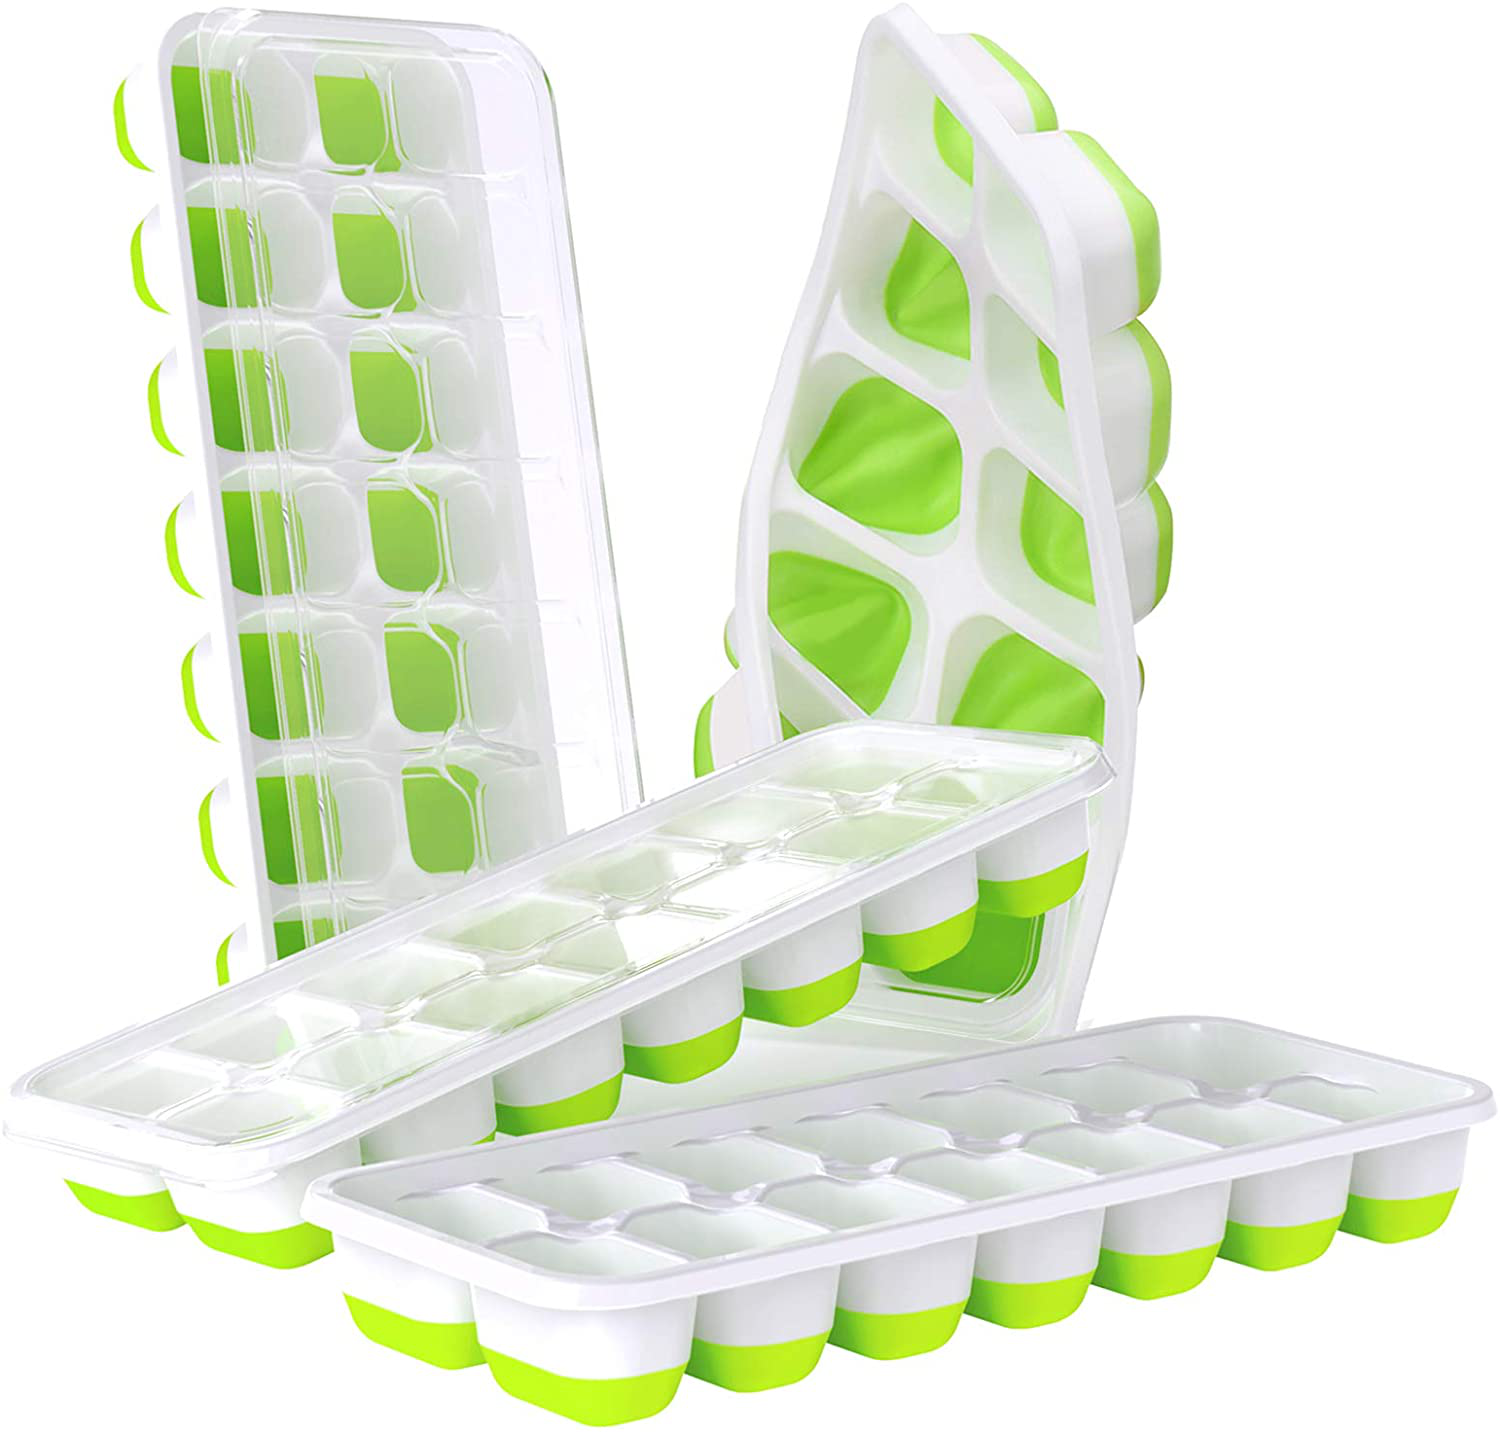 DOQAUS Ice Cube Trays 4 Pack, Easy-Release Silicone & Flexible 14-Ice Cube Trays with Spill-Resistant Removable Lid, LFGB Certified and BPA Free, for Cocktail, Freezer, Stackable Ice Trays with Covers